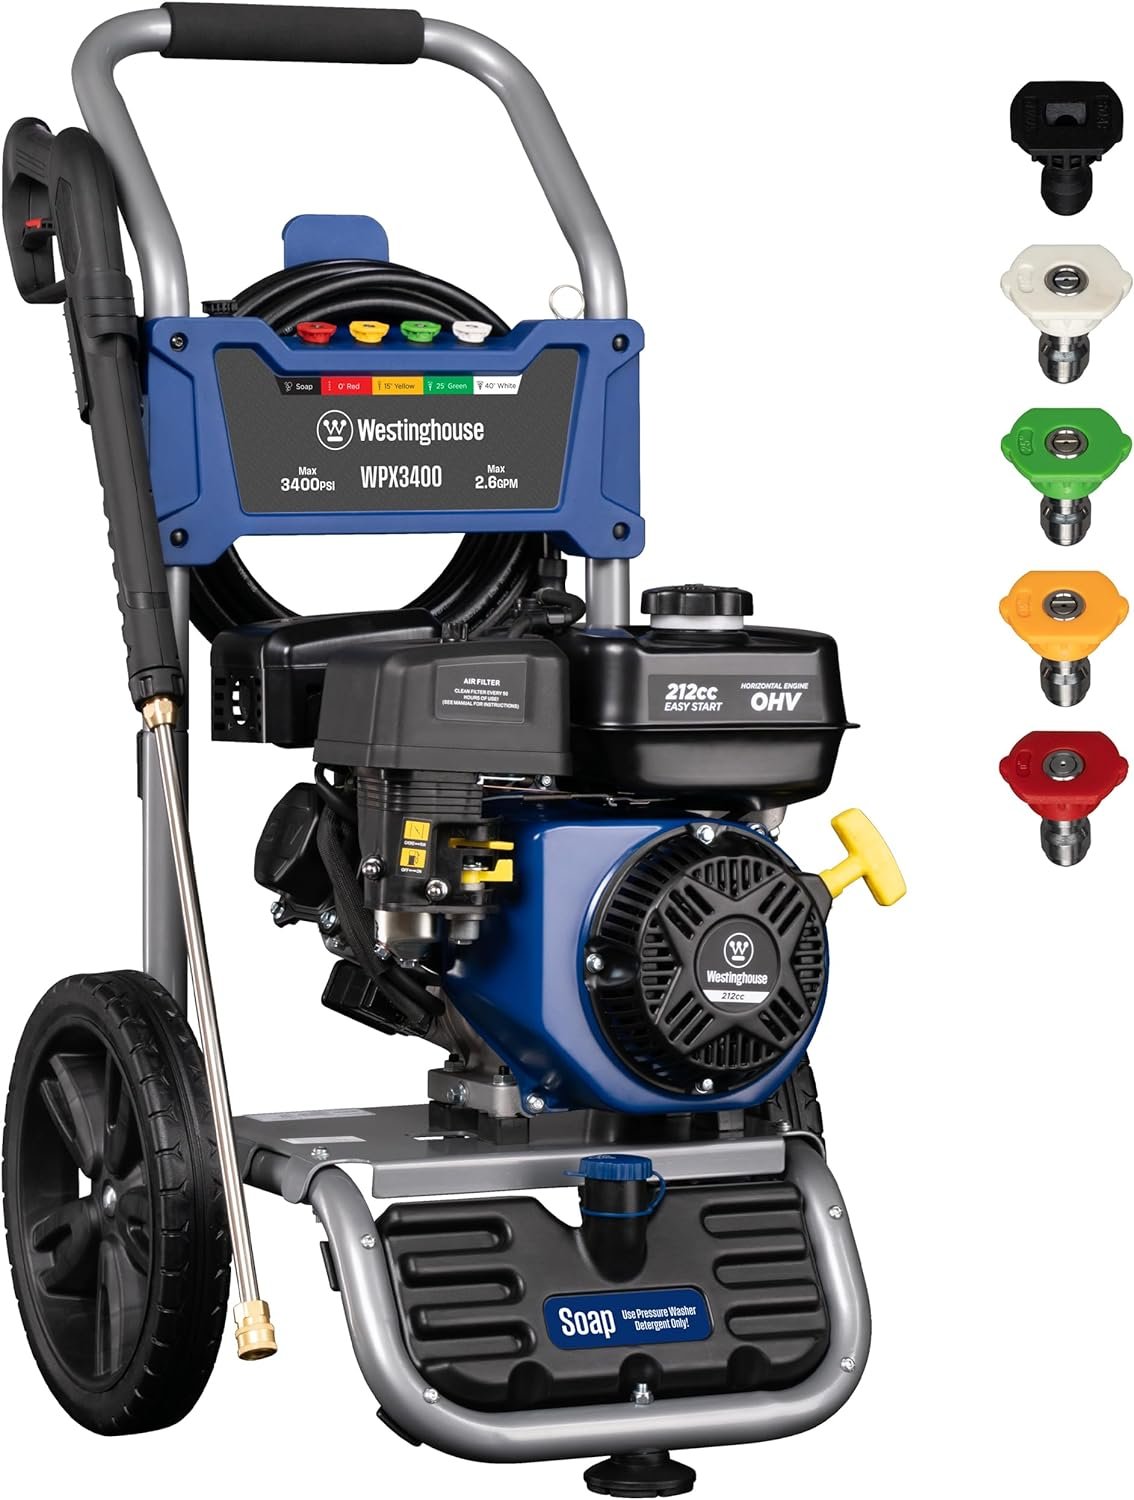 Westinghouse WPX3400 Gas Pressure Washer Review